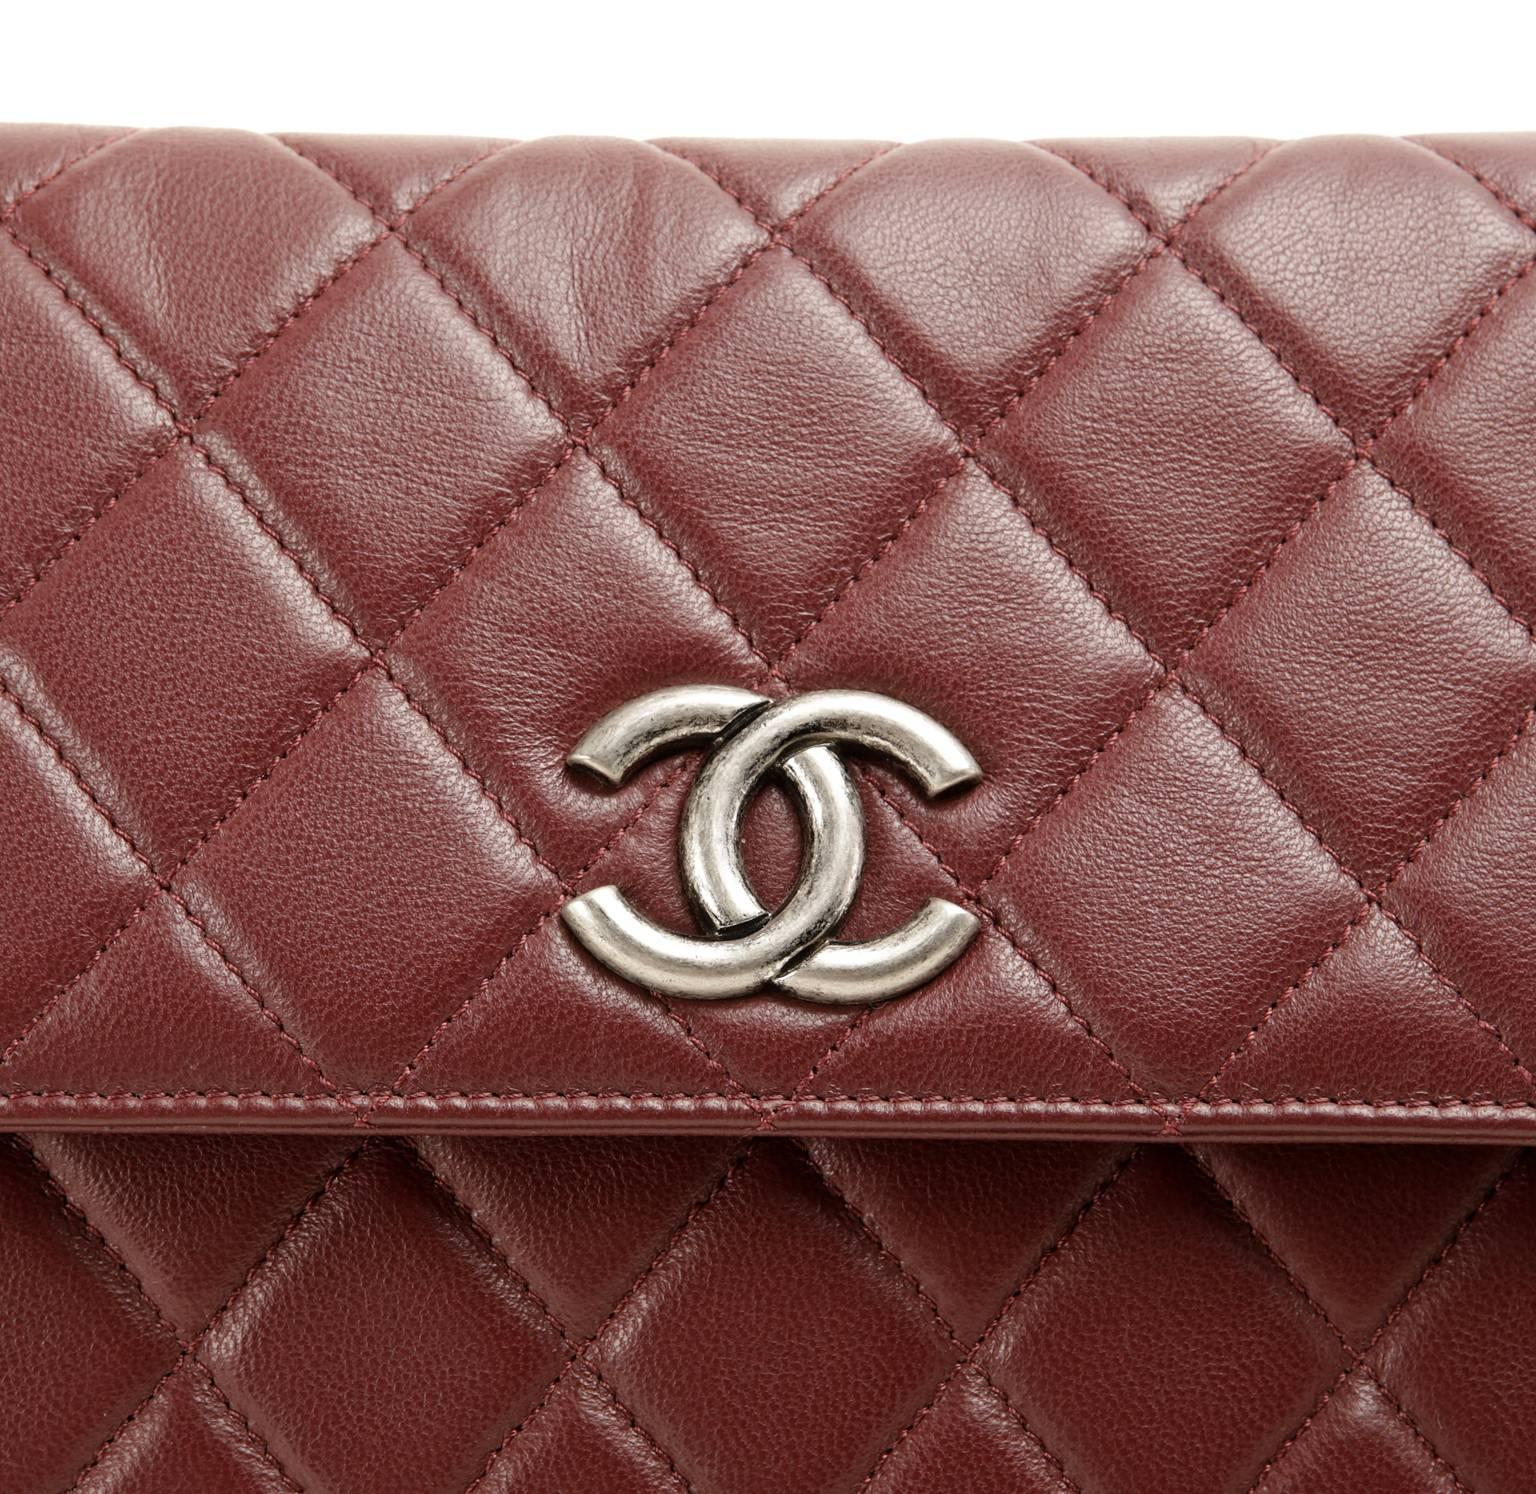 Chanel Bordeaux Leather XL Clutch In New Condition For Sale In Malibu, CA